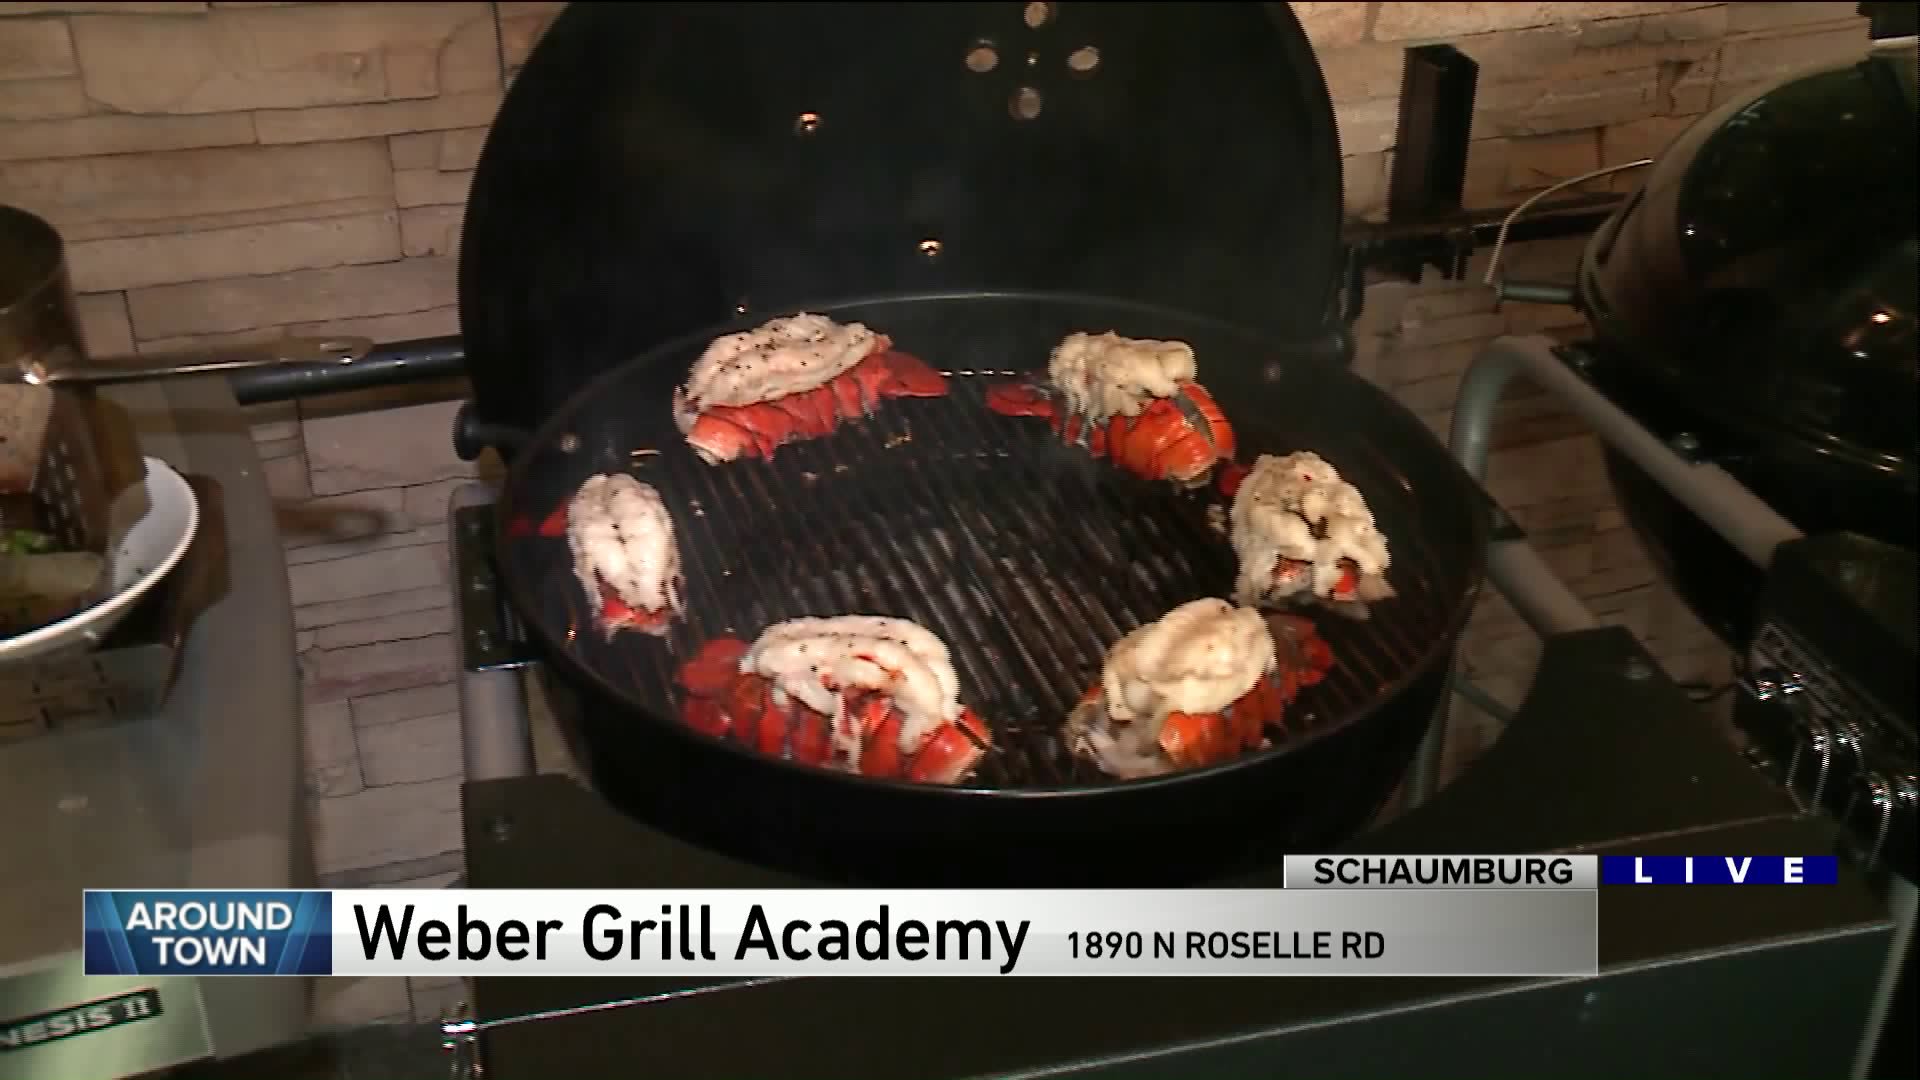 Around Town checks out the Weber Grill Academy